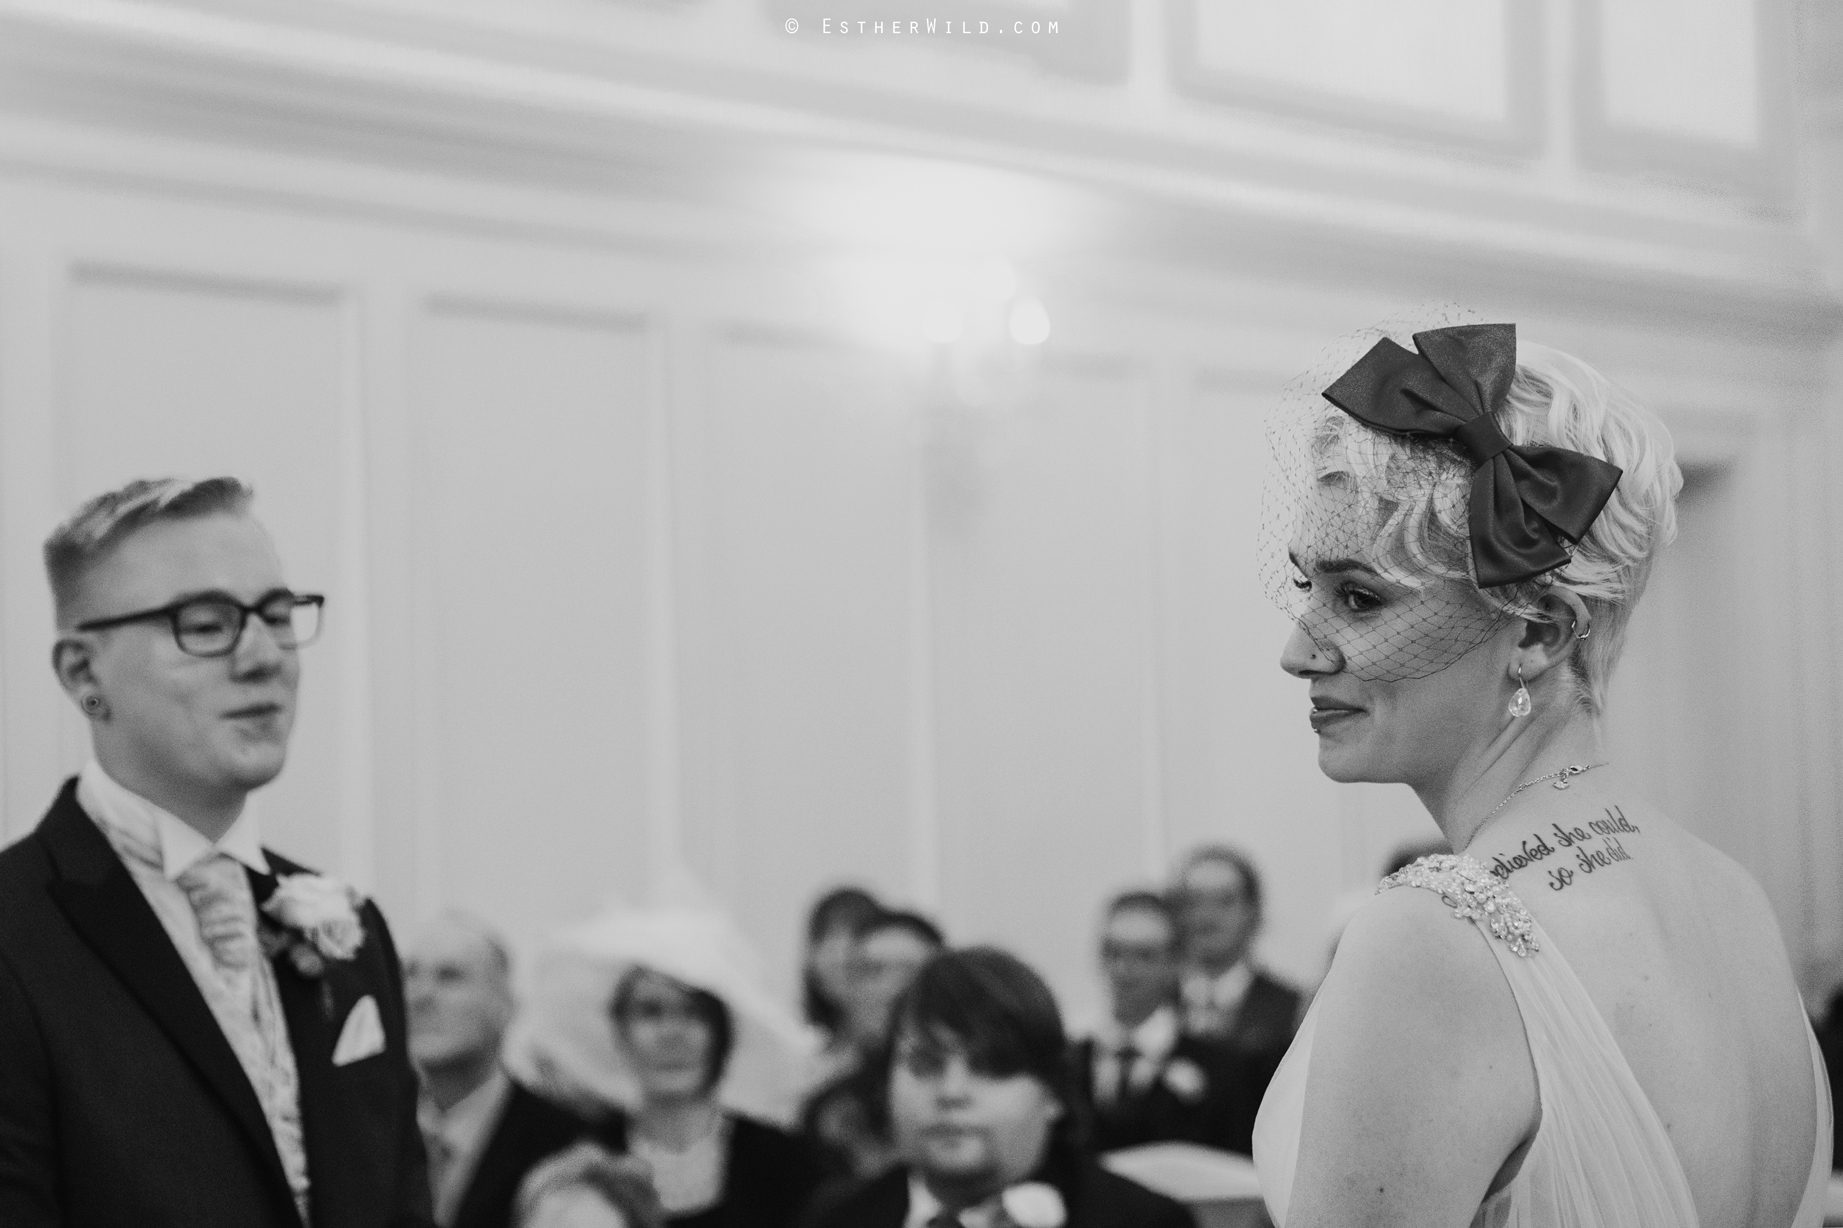 Norwich_Assembly_House_Wedding_Esther_Wild_Photographer_IMG_3883-1.jpg